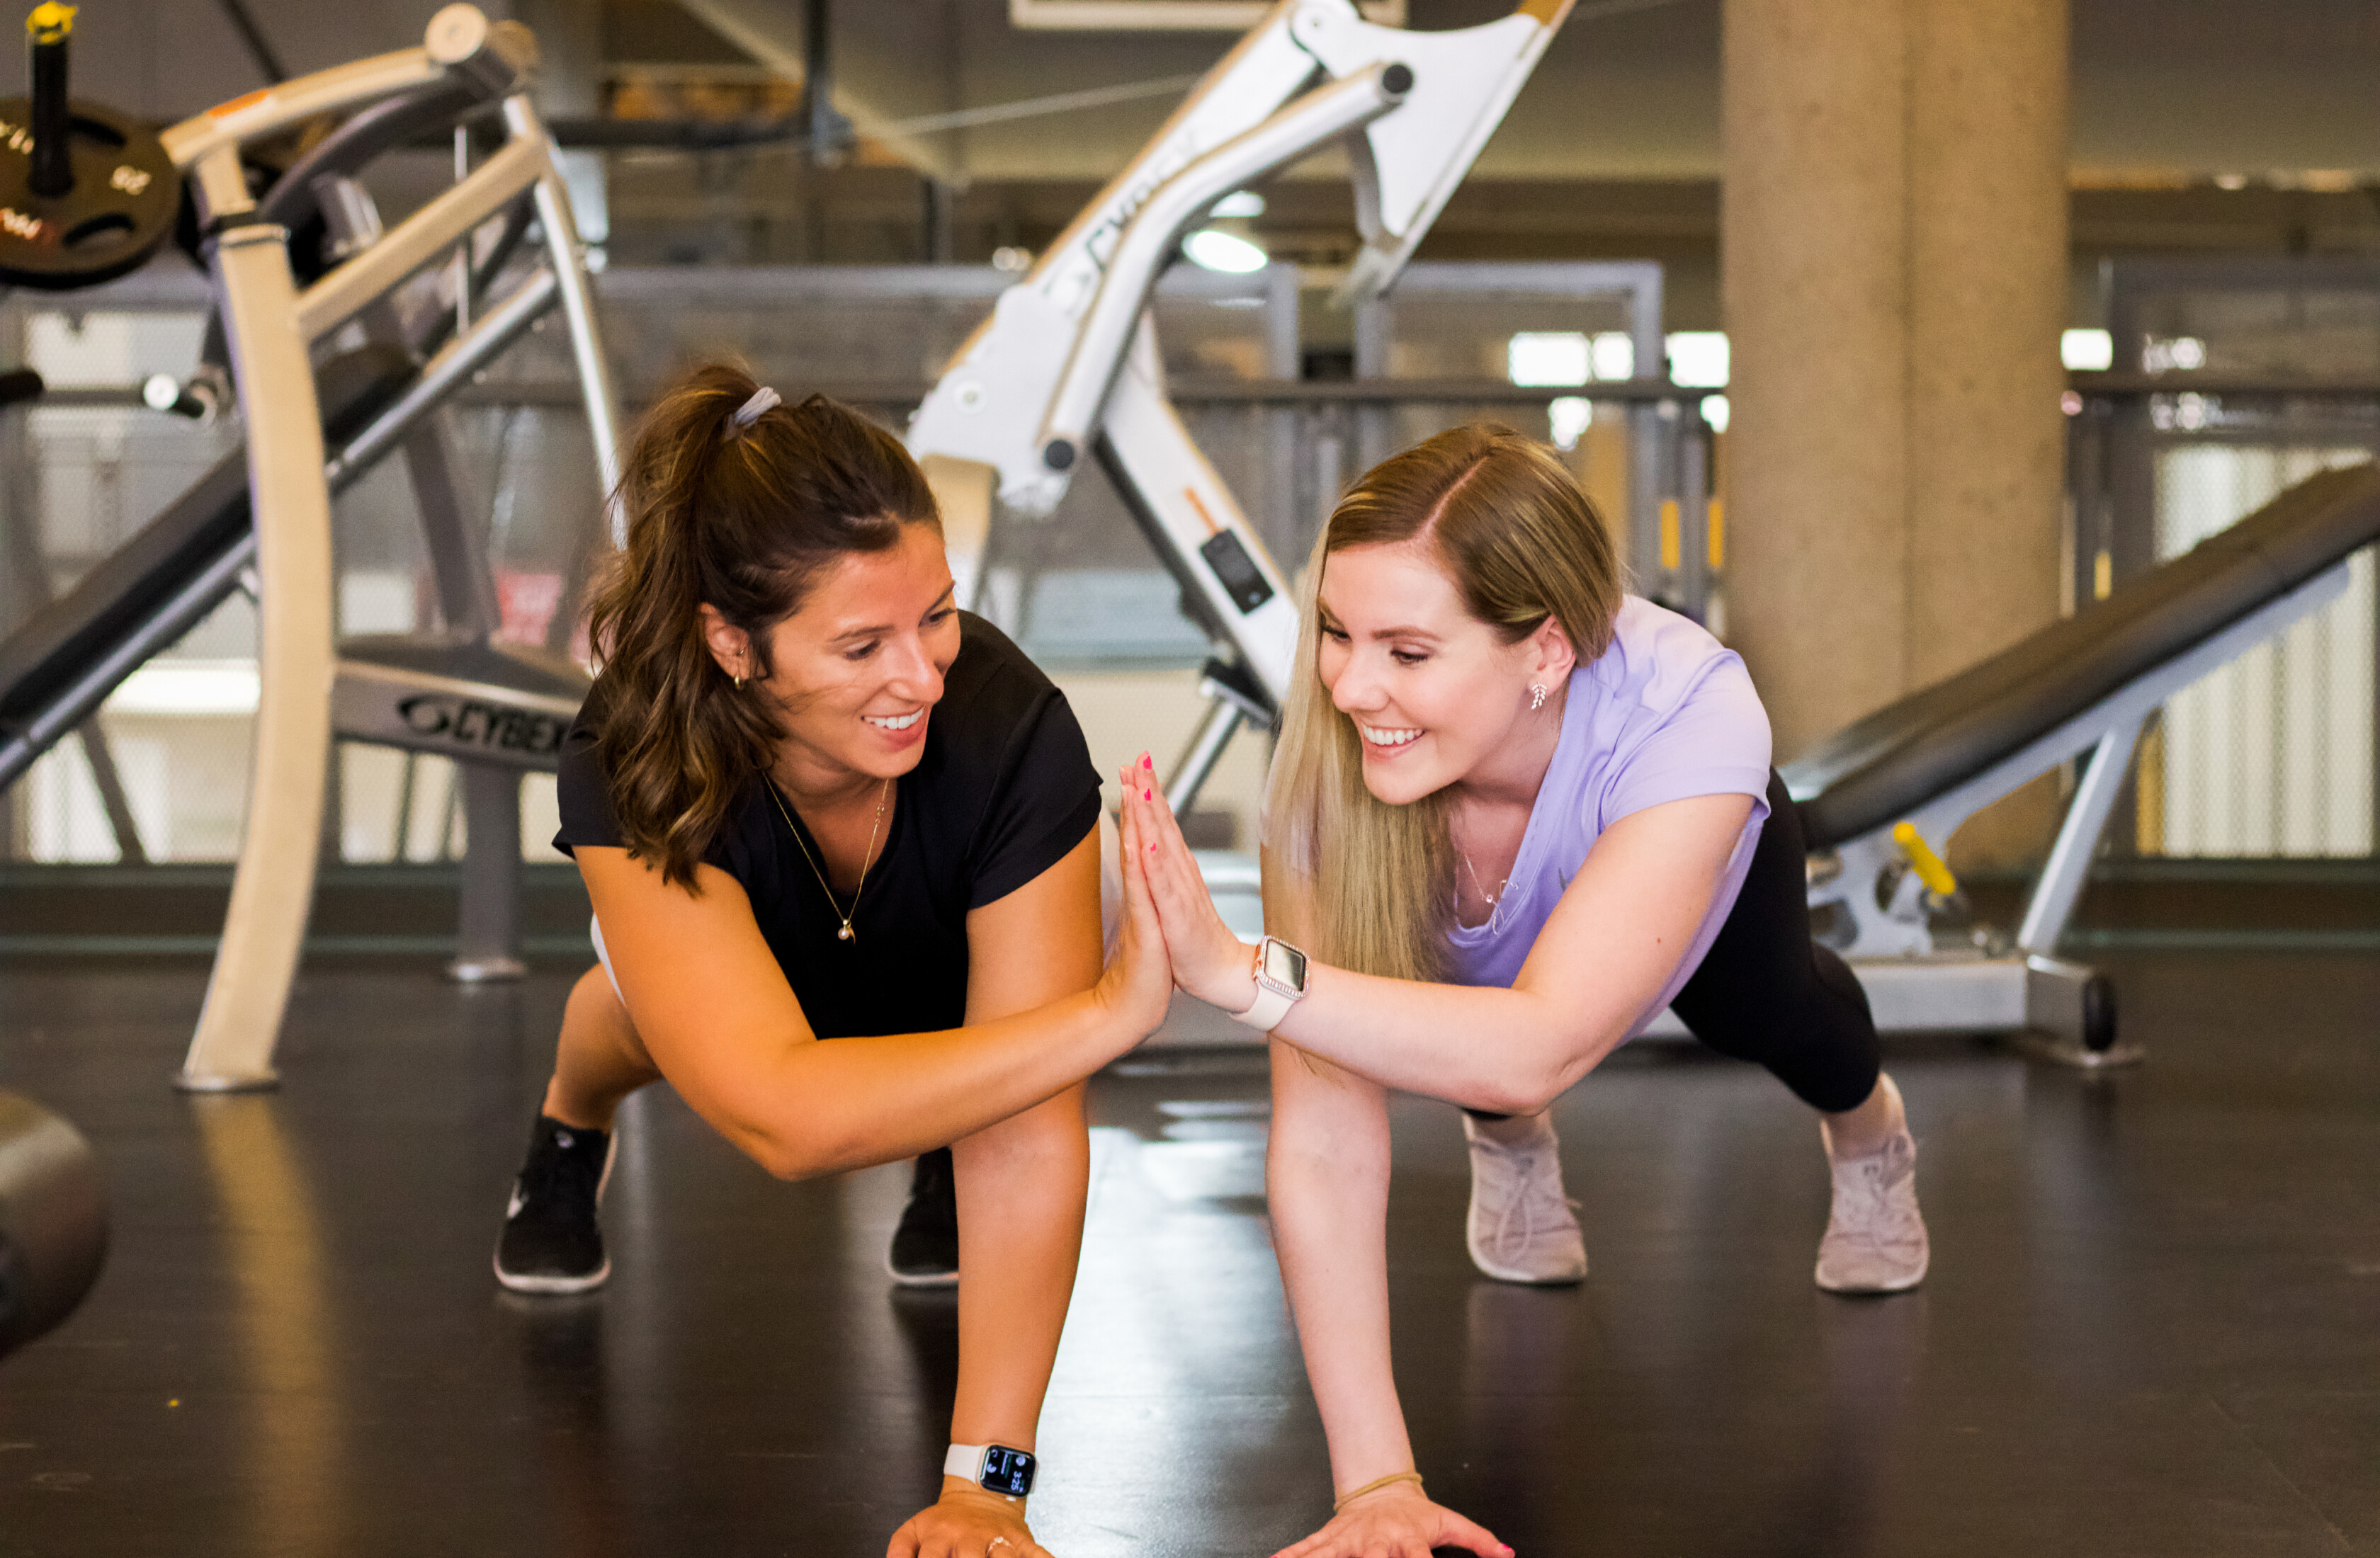 Two women working out together at a gym.